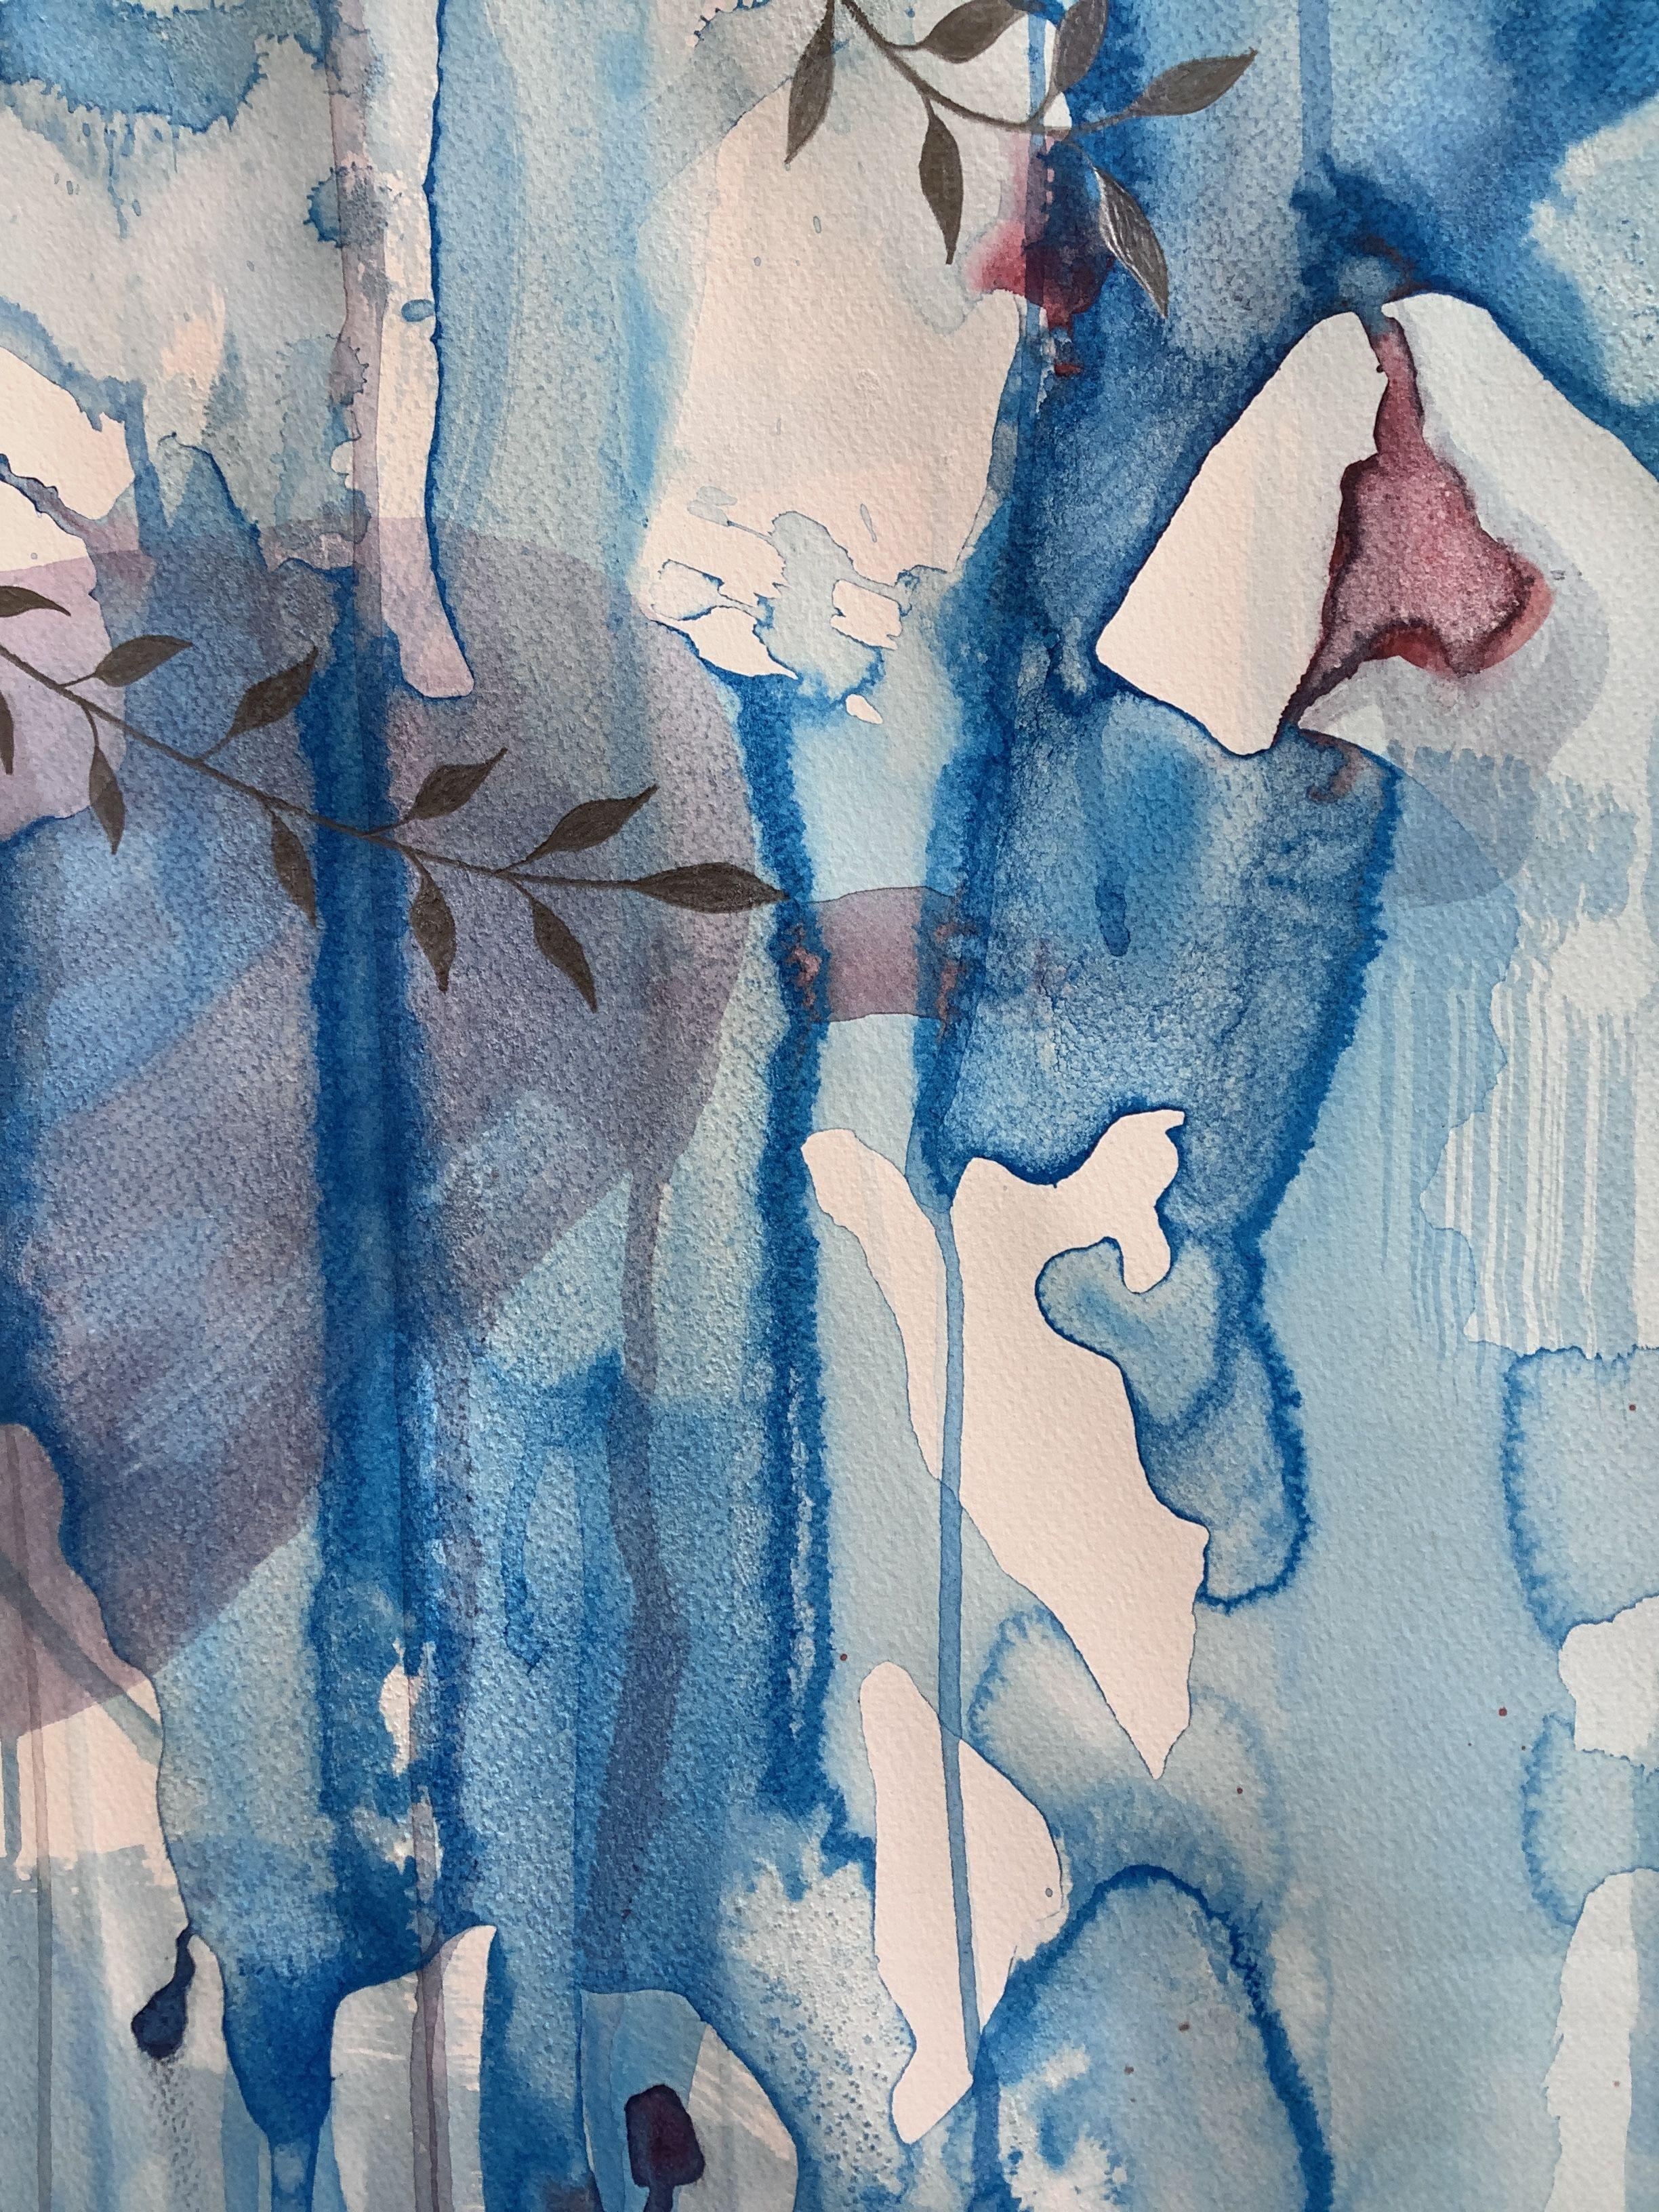 Private jungle, Painting, Watercolor on Paper - Abstract Art by Irene Raspollini